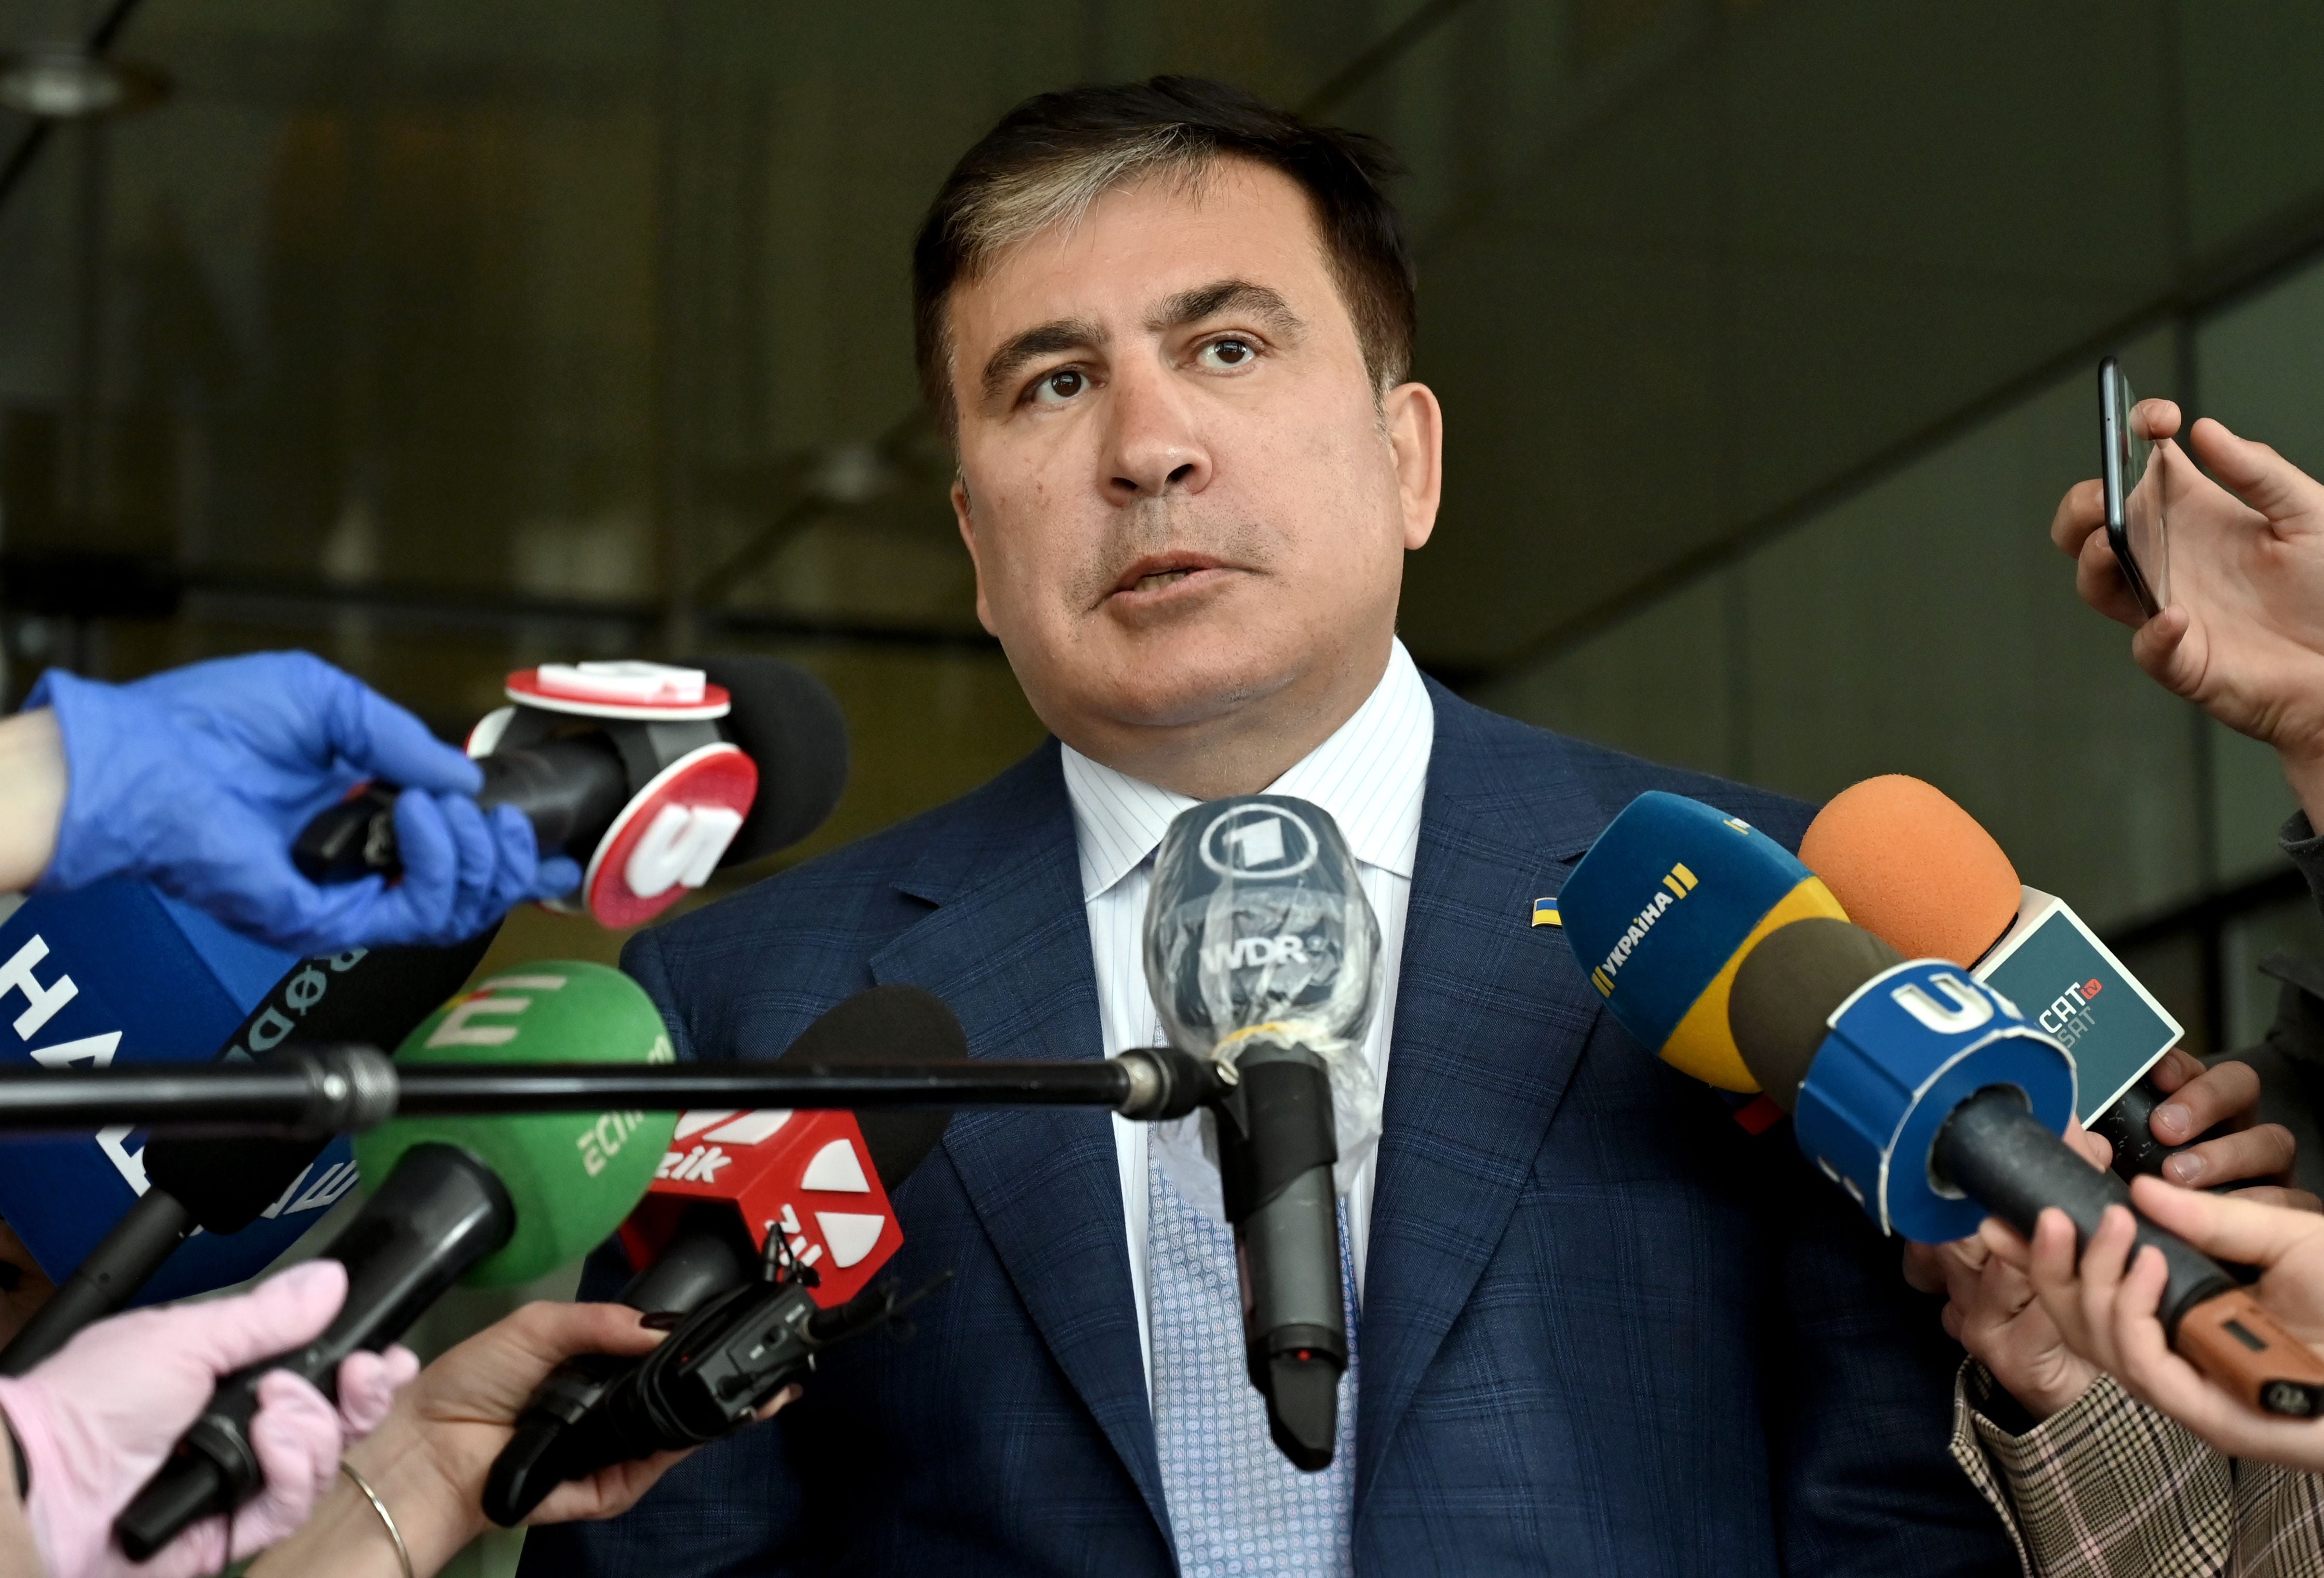 Mikheil Saakashvili, the former president of Georgia, says he has returned to the country